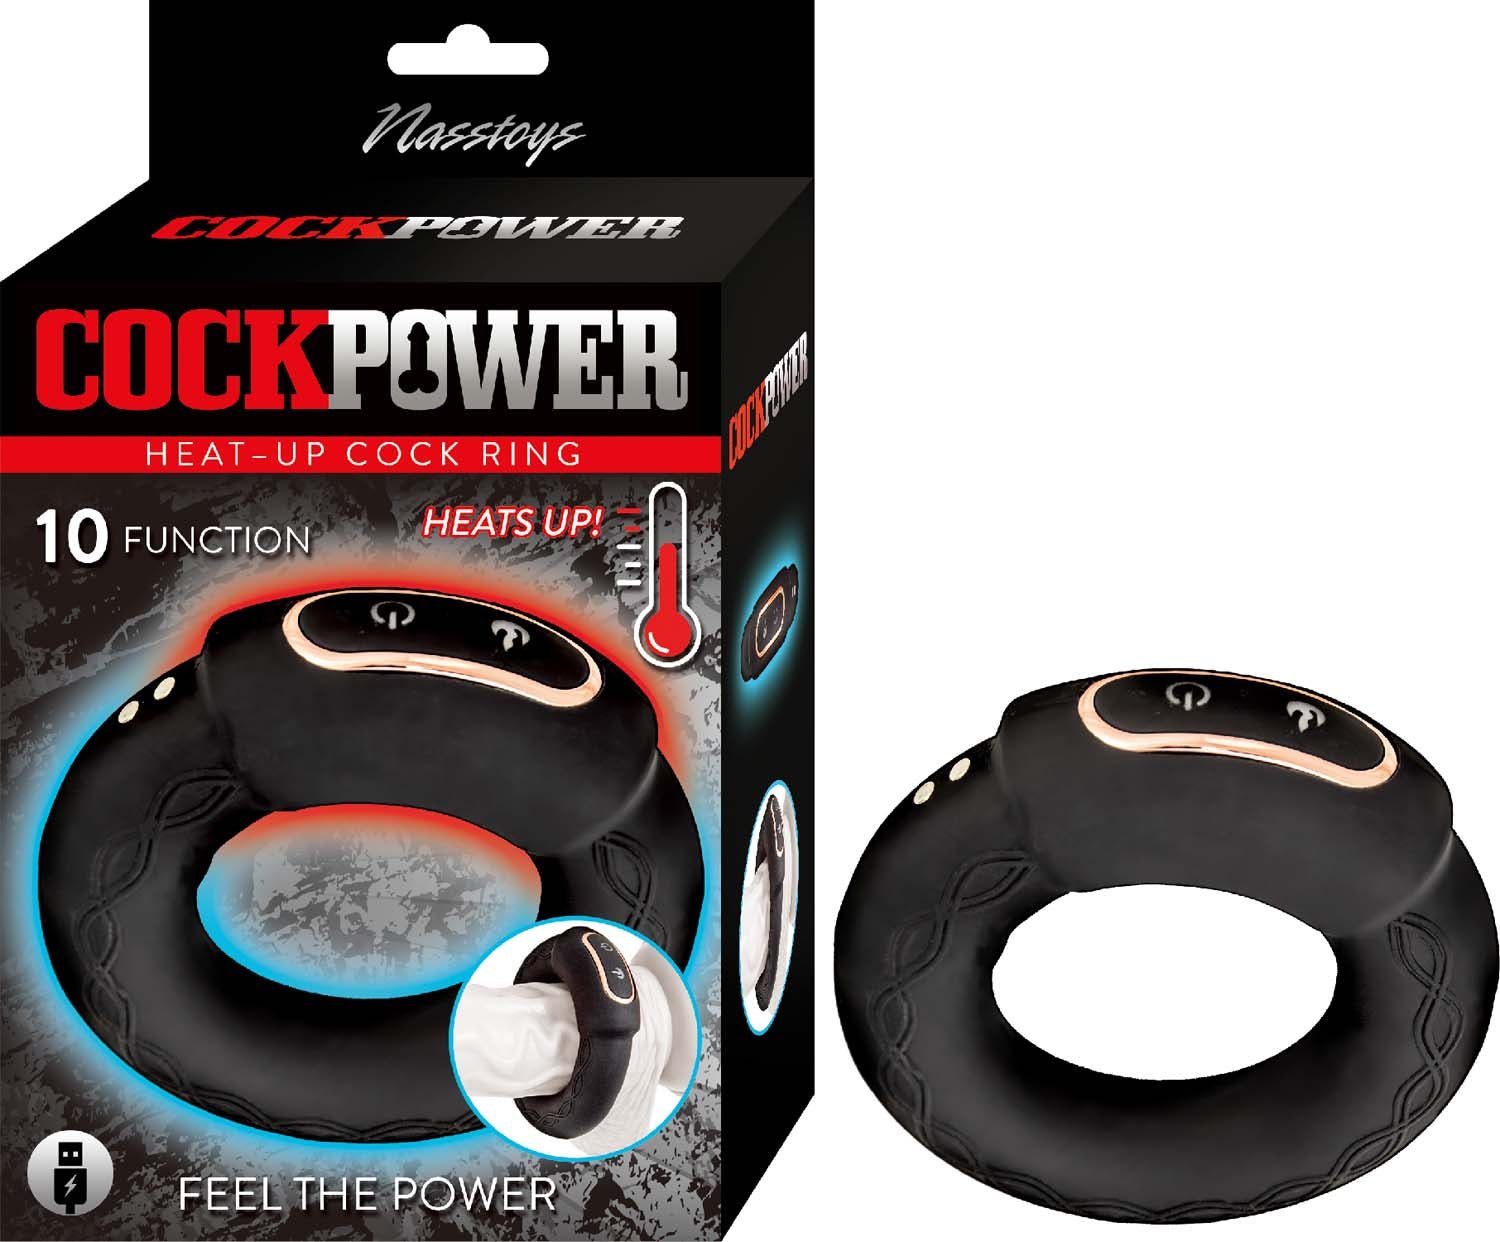 COCKPOWER Heat Up Cock Ring - Black | CheapLubes.com